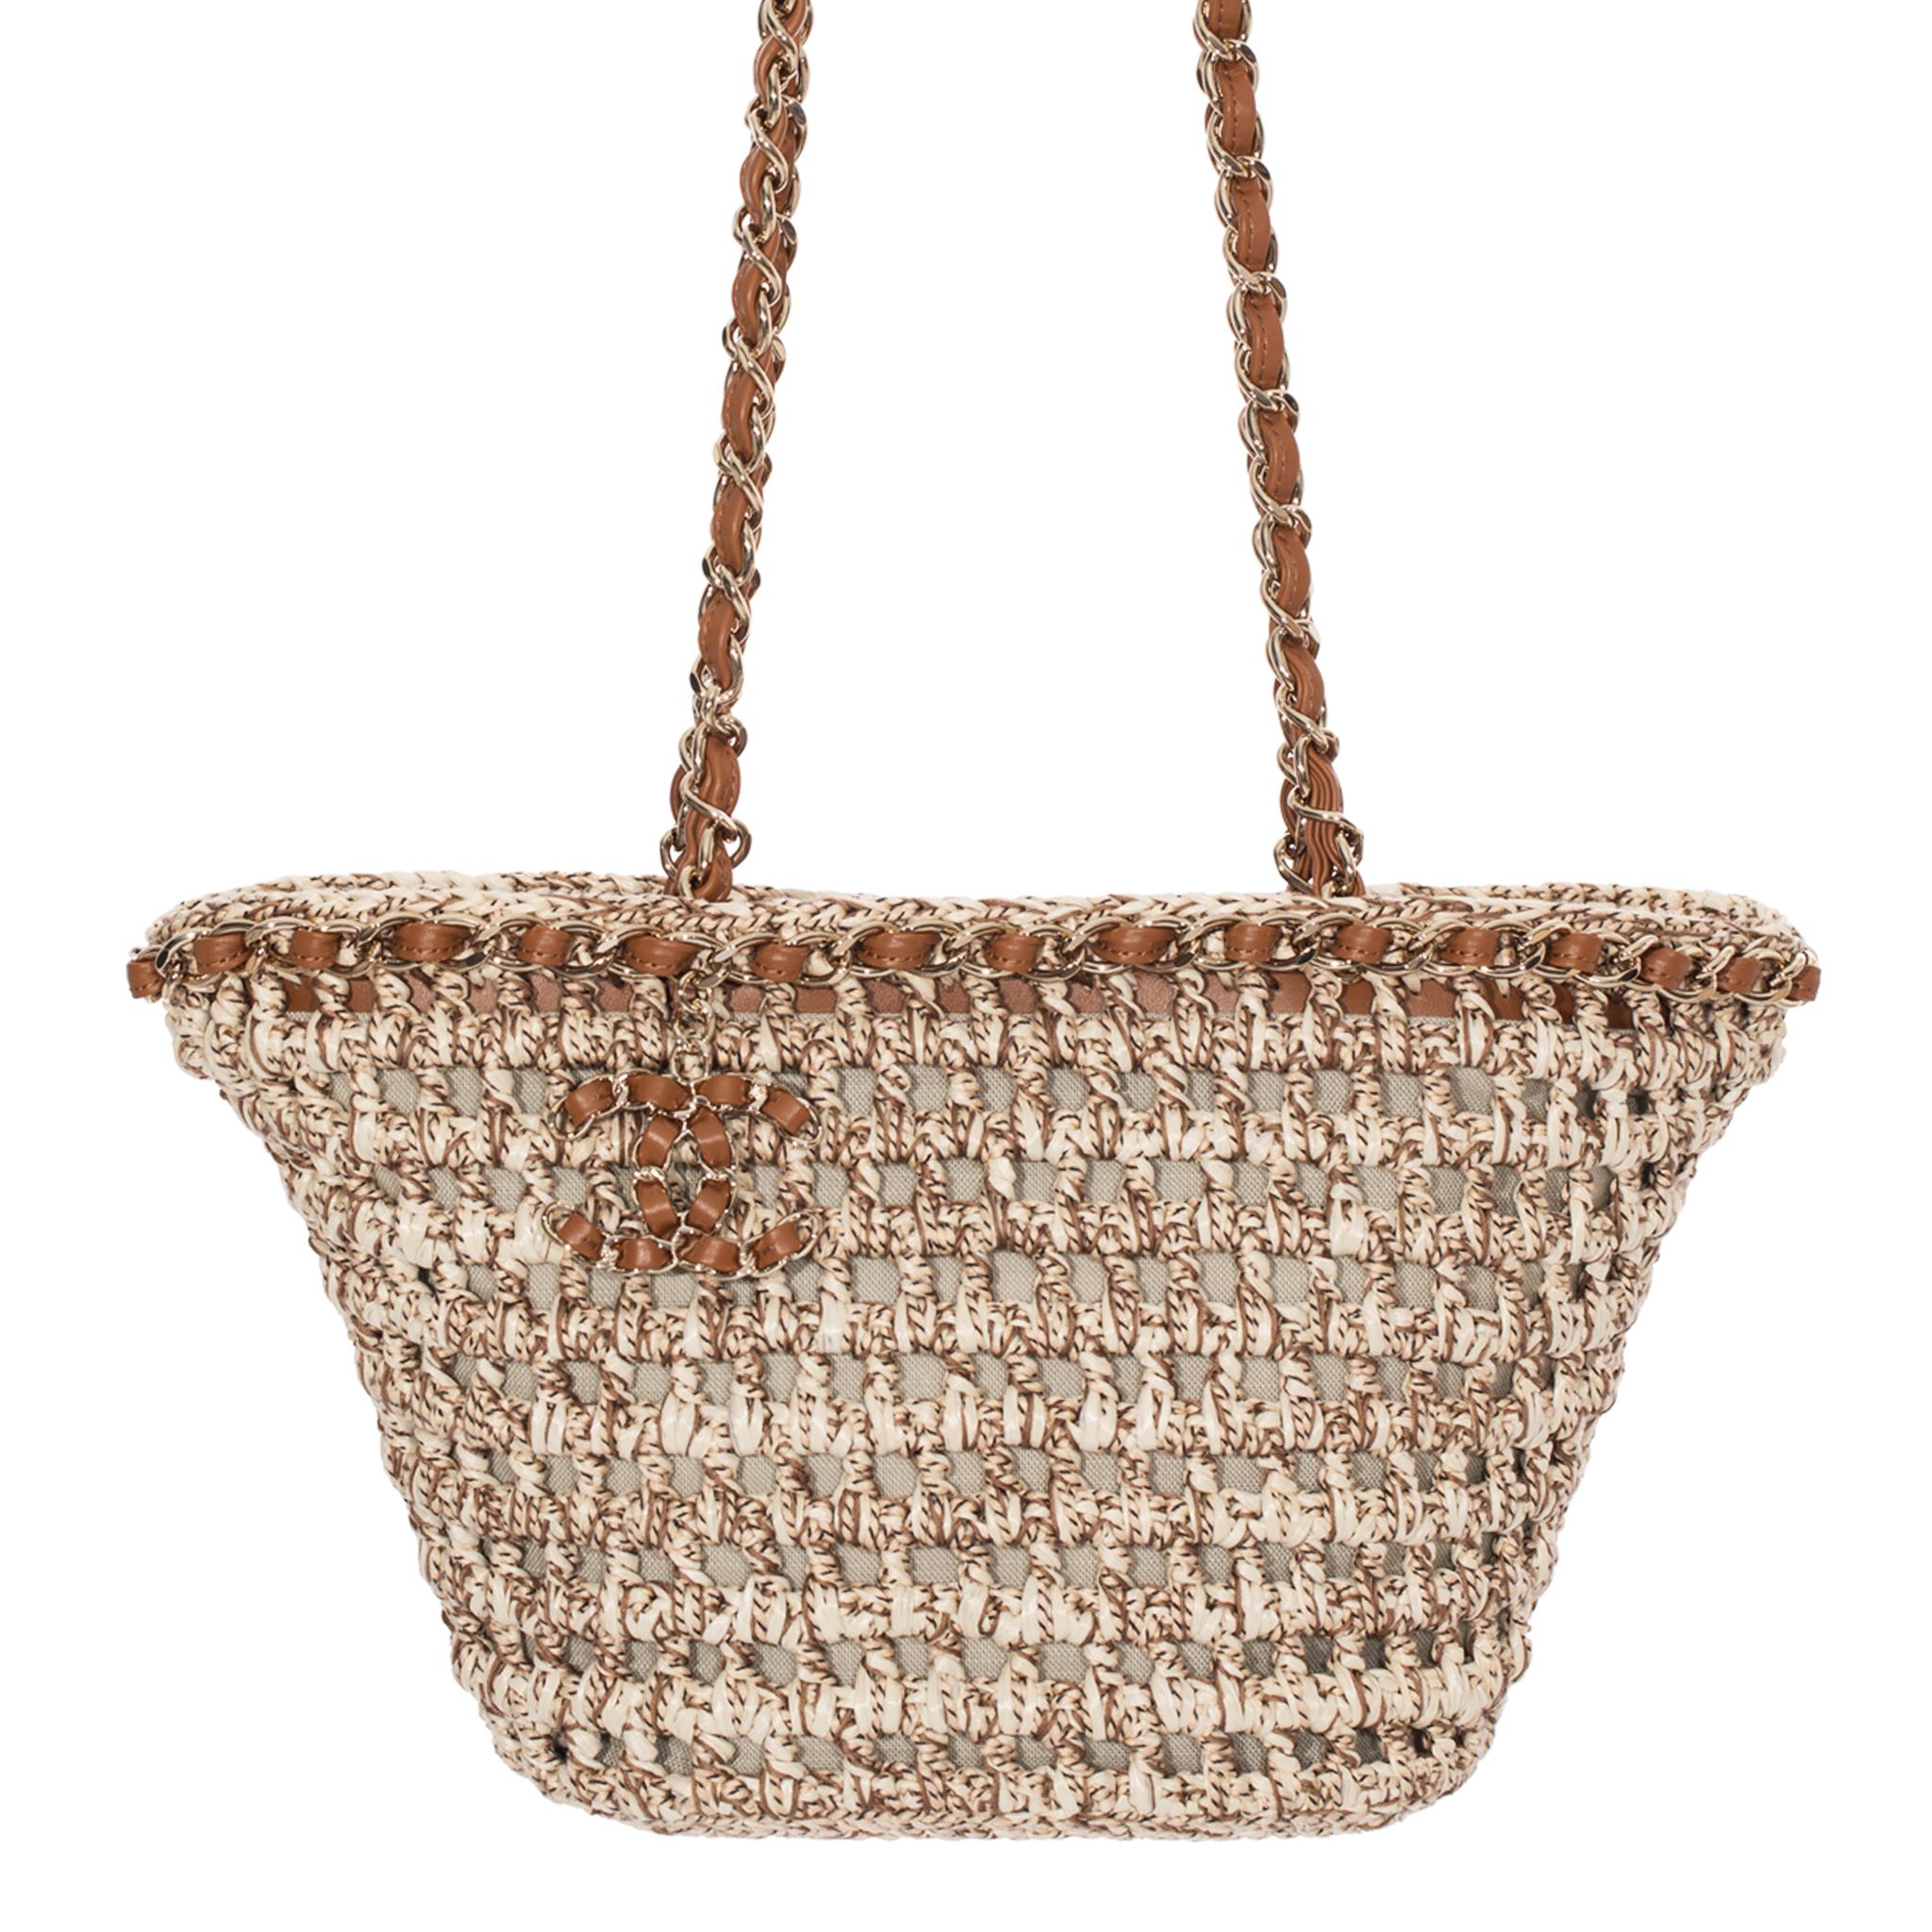 Brand:

Chanel

Product:

Chanel Crochet Shopping Tote

Size:

L 36 X H 20 X D 12 Cm

Colour:

Beige & Tan

Material:

Crochet, Mixed Fibers

Hardware:

Gold-Tone

Series:

2023

Condition:

Pristine; New Or Never Worn

Accompanied By:

Chanel